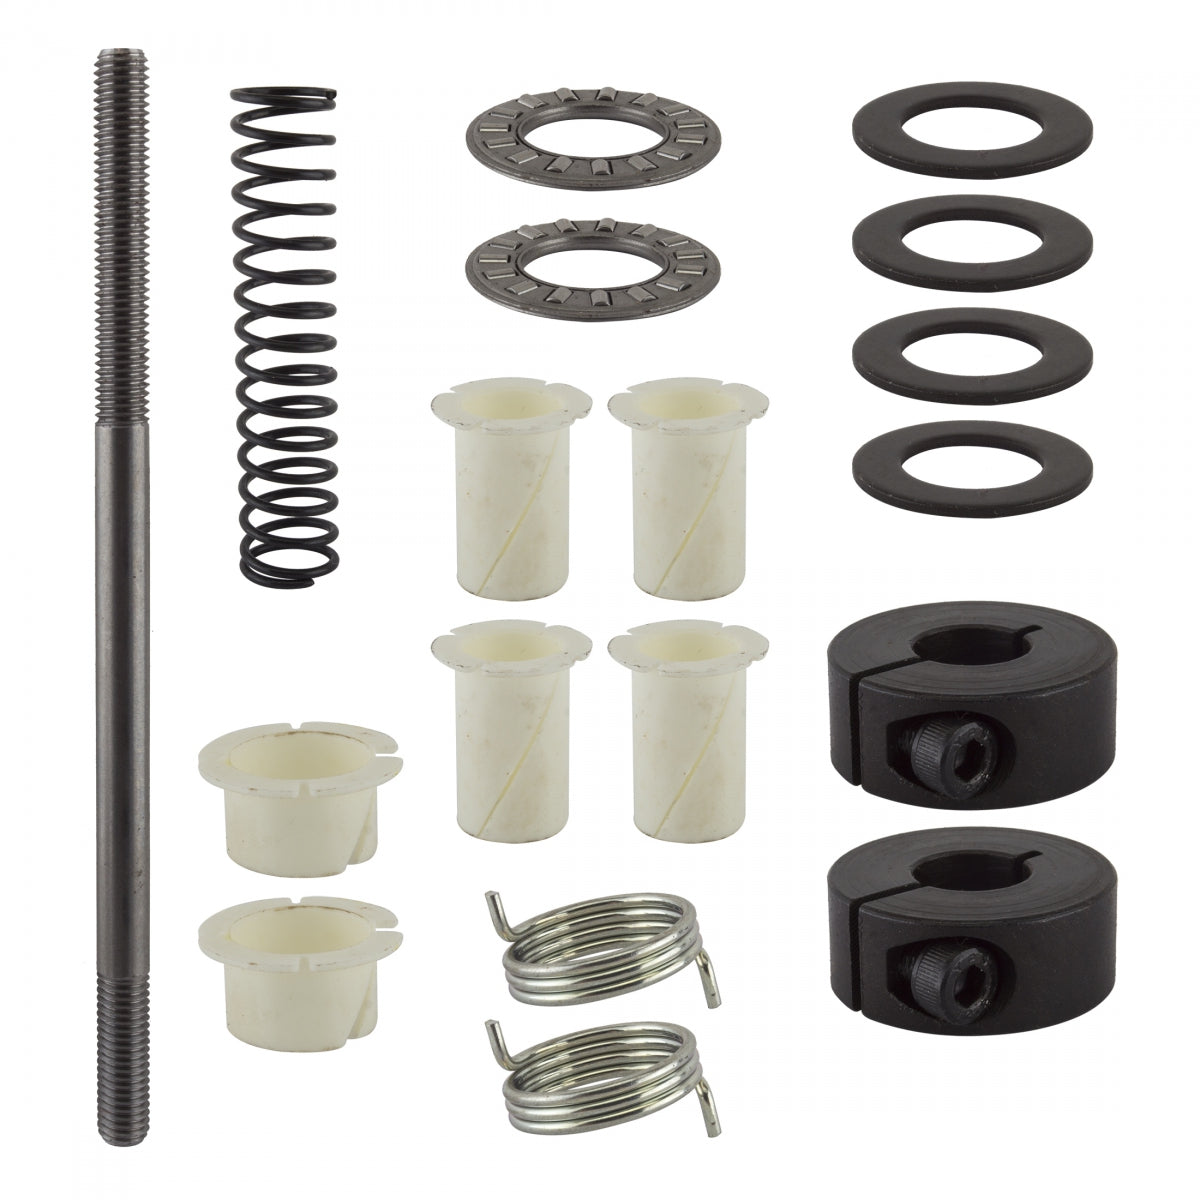 Park Tool #TS-RK Repair Kit for #TS-2 Truing Stand